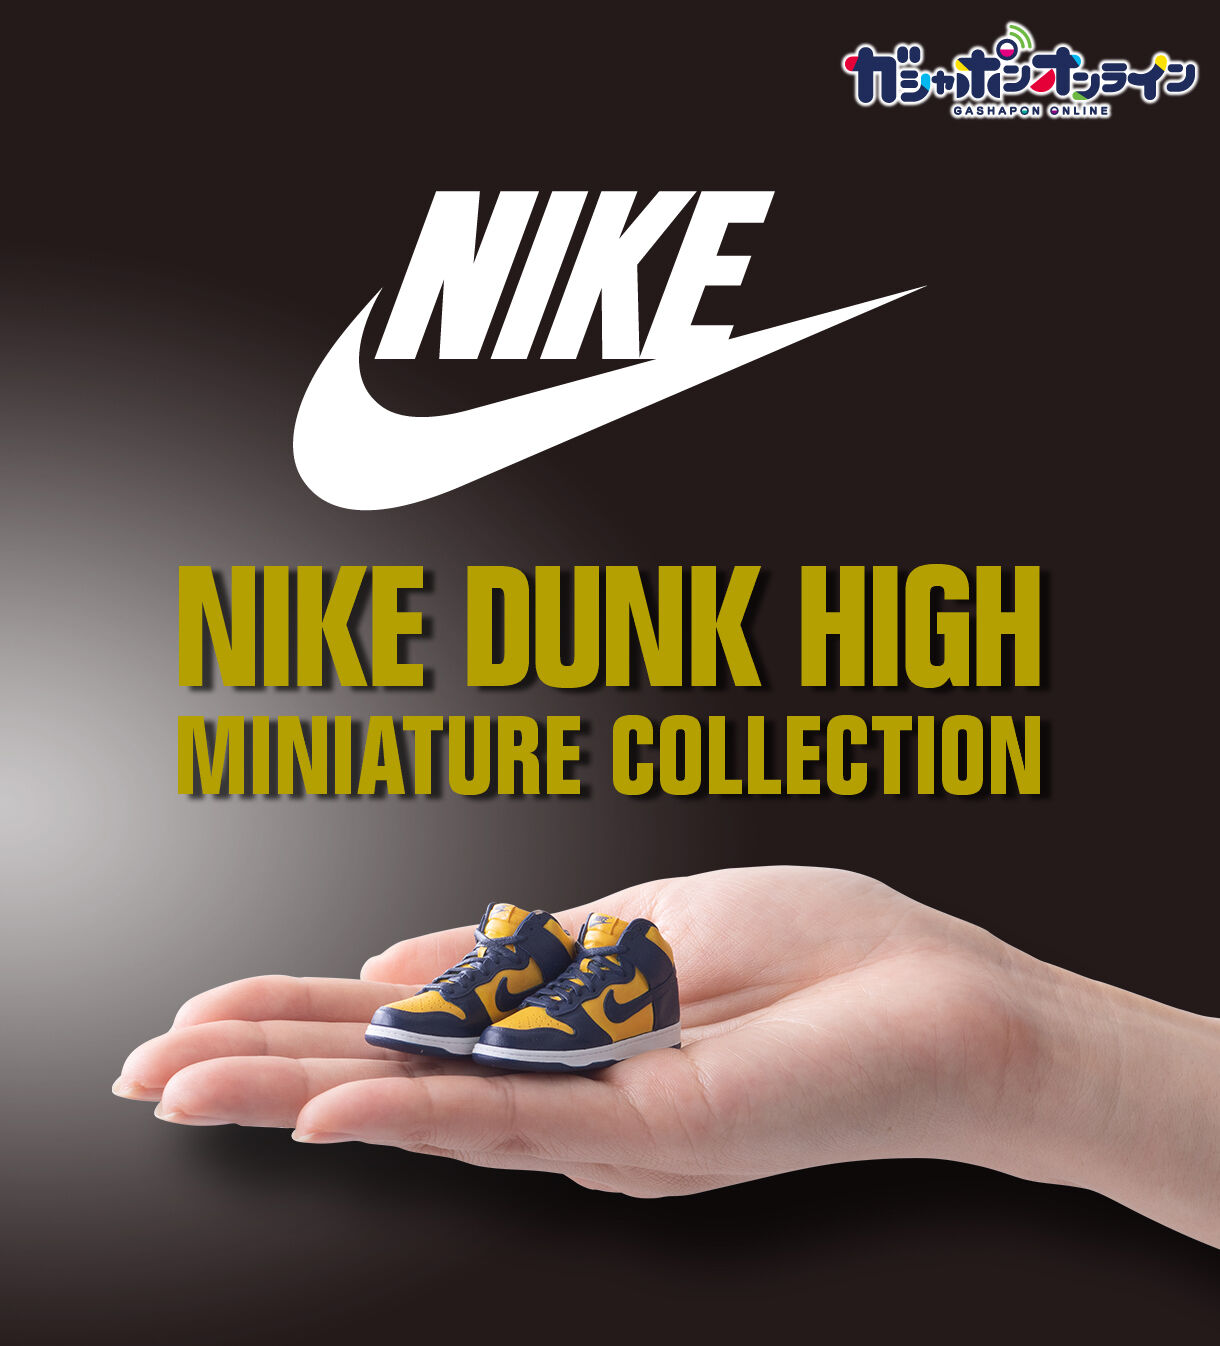 NIKE DUNK HIGH miniature collection フィギュア・プラモデル・プラキット バンダイナムコグループ公式通販サイト